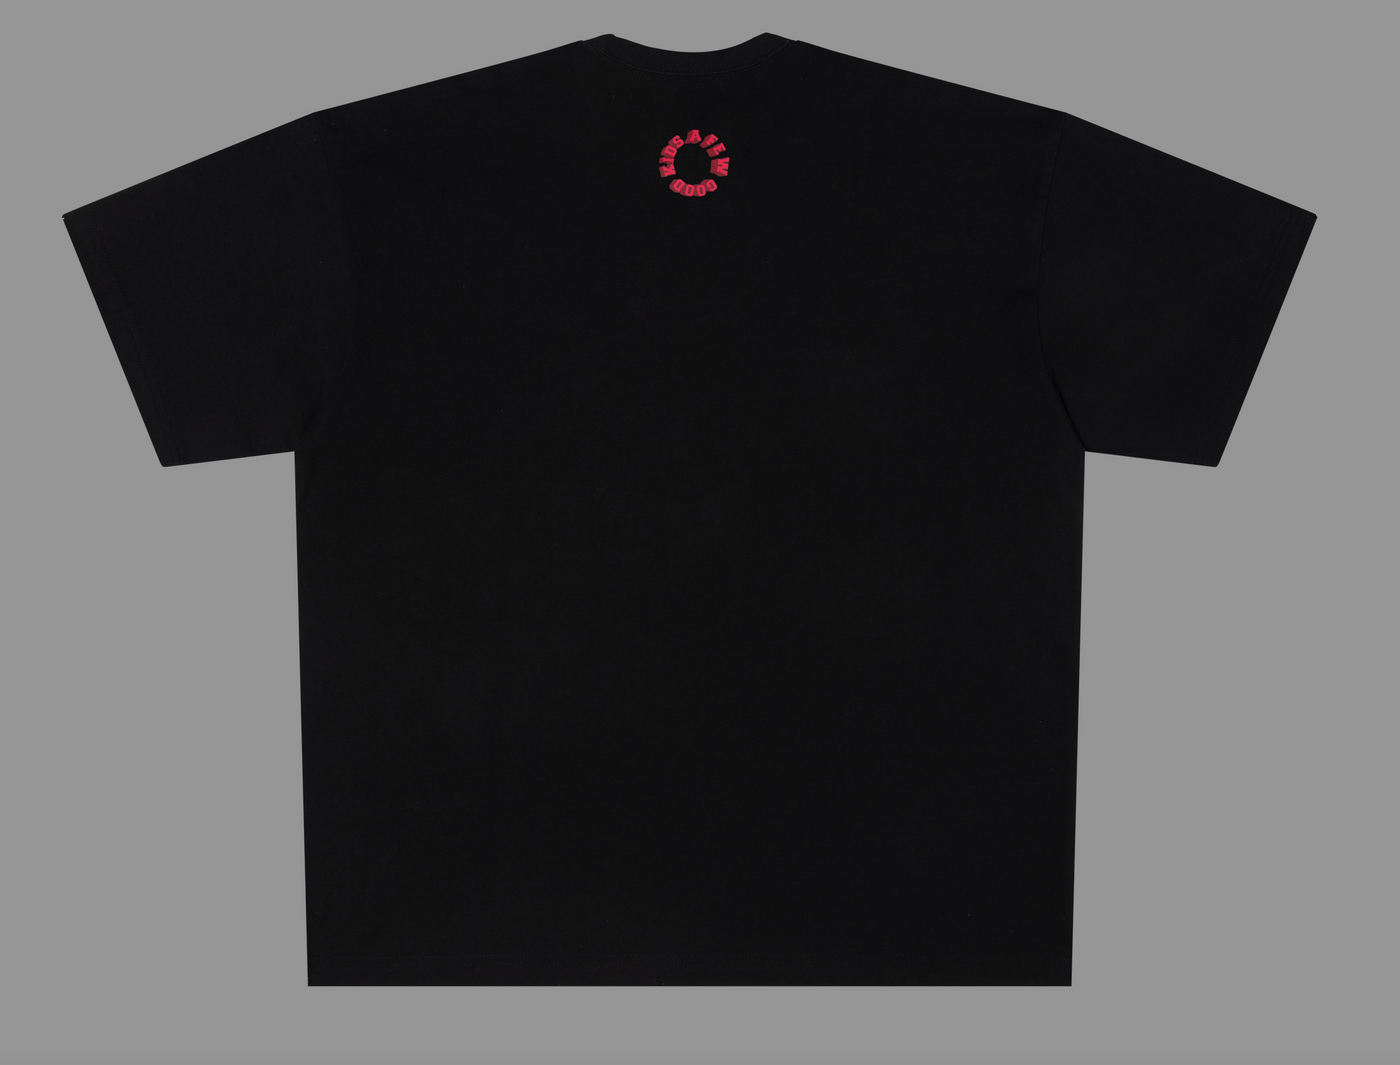 DONCARE(AFGK) "Puff heart logo tee"